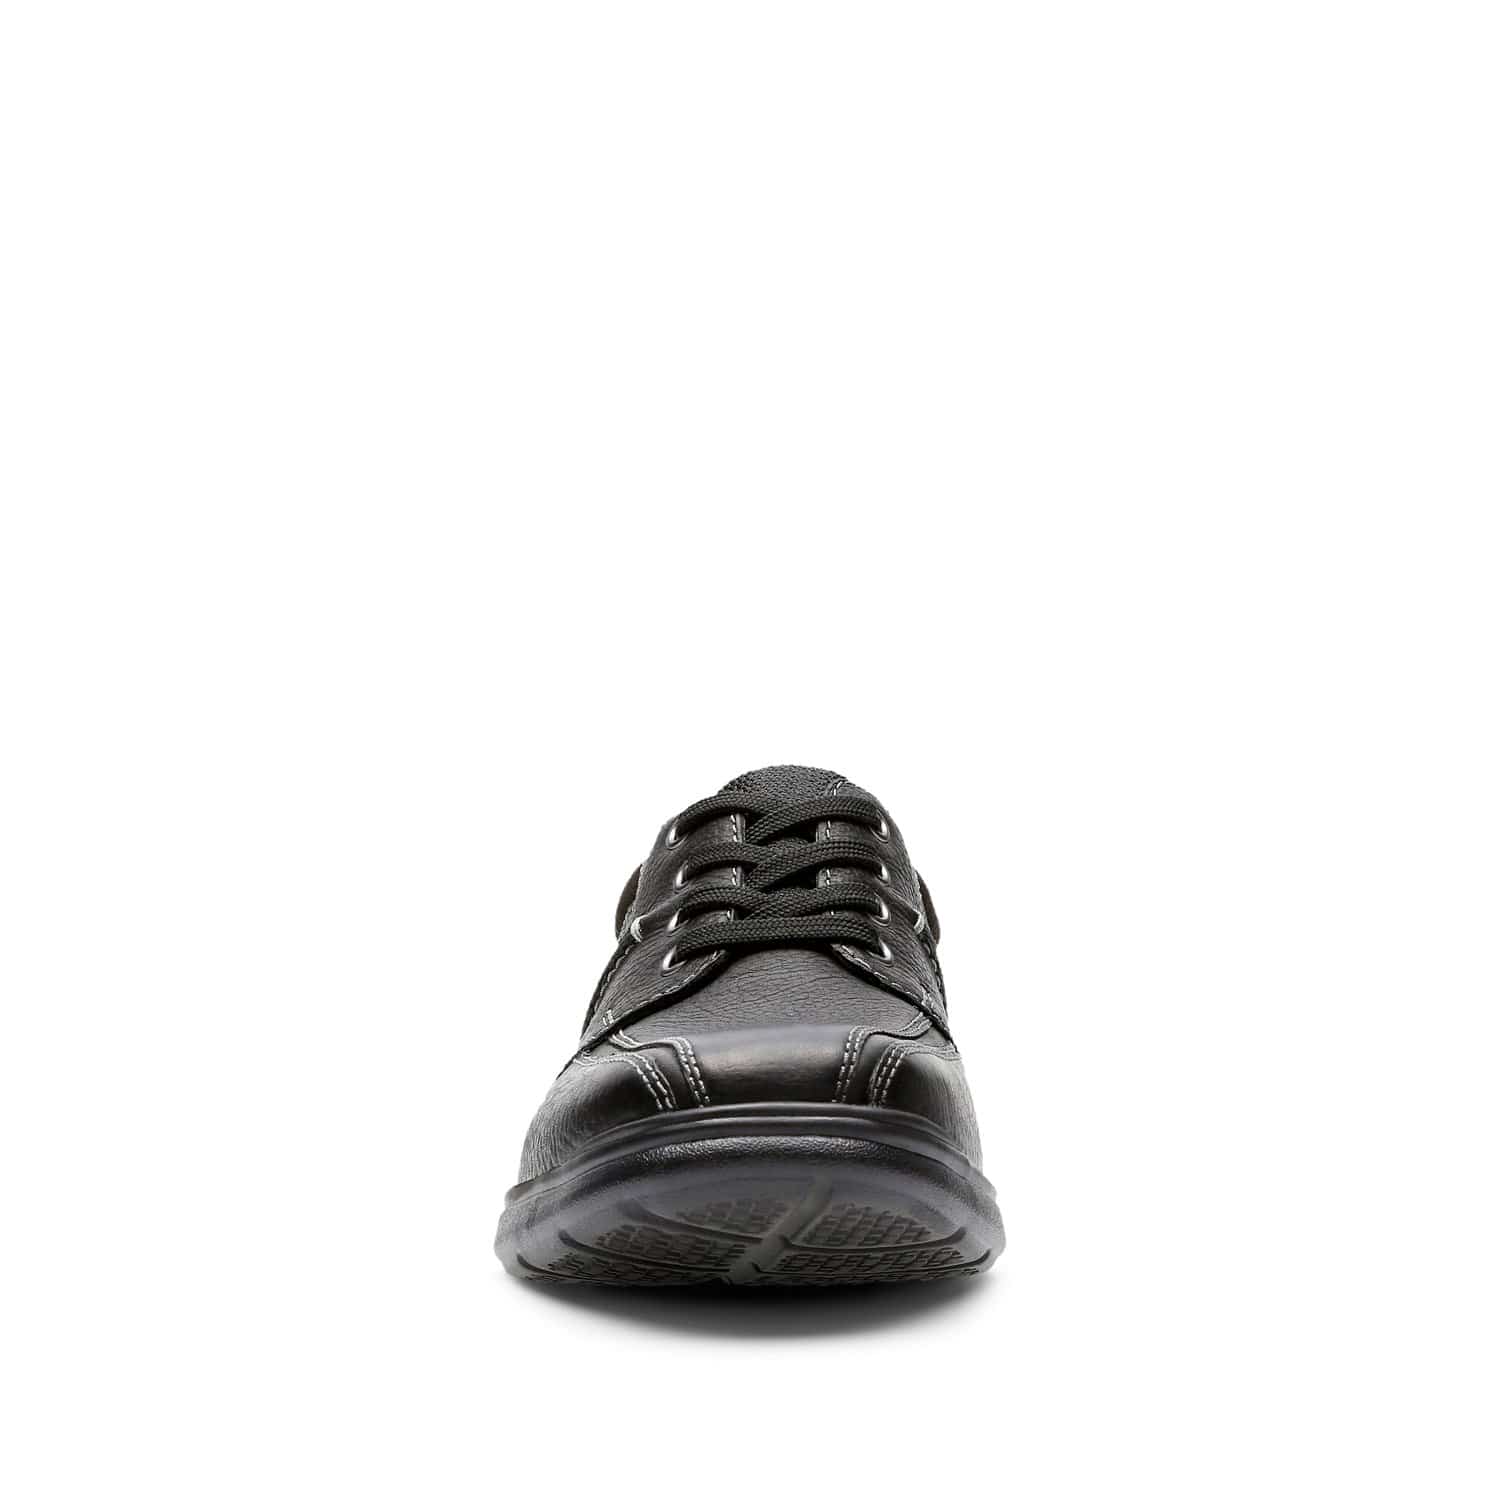 Clarks-Cotrell-Walk-Men's-Shoes-Black-Oily-Leather-26119725